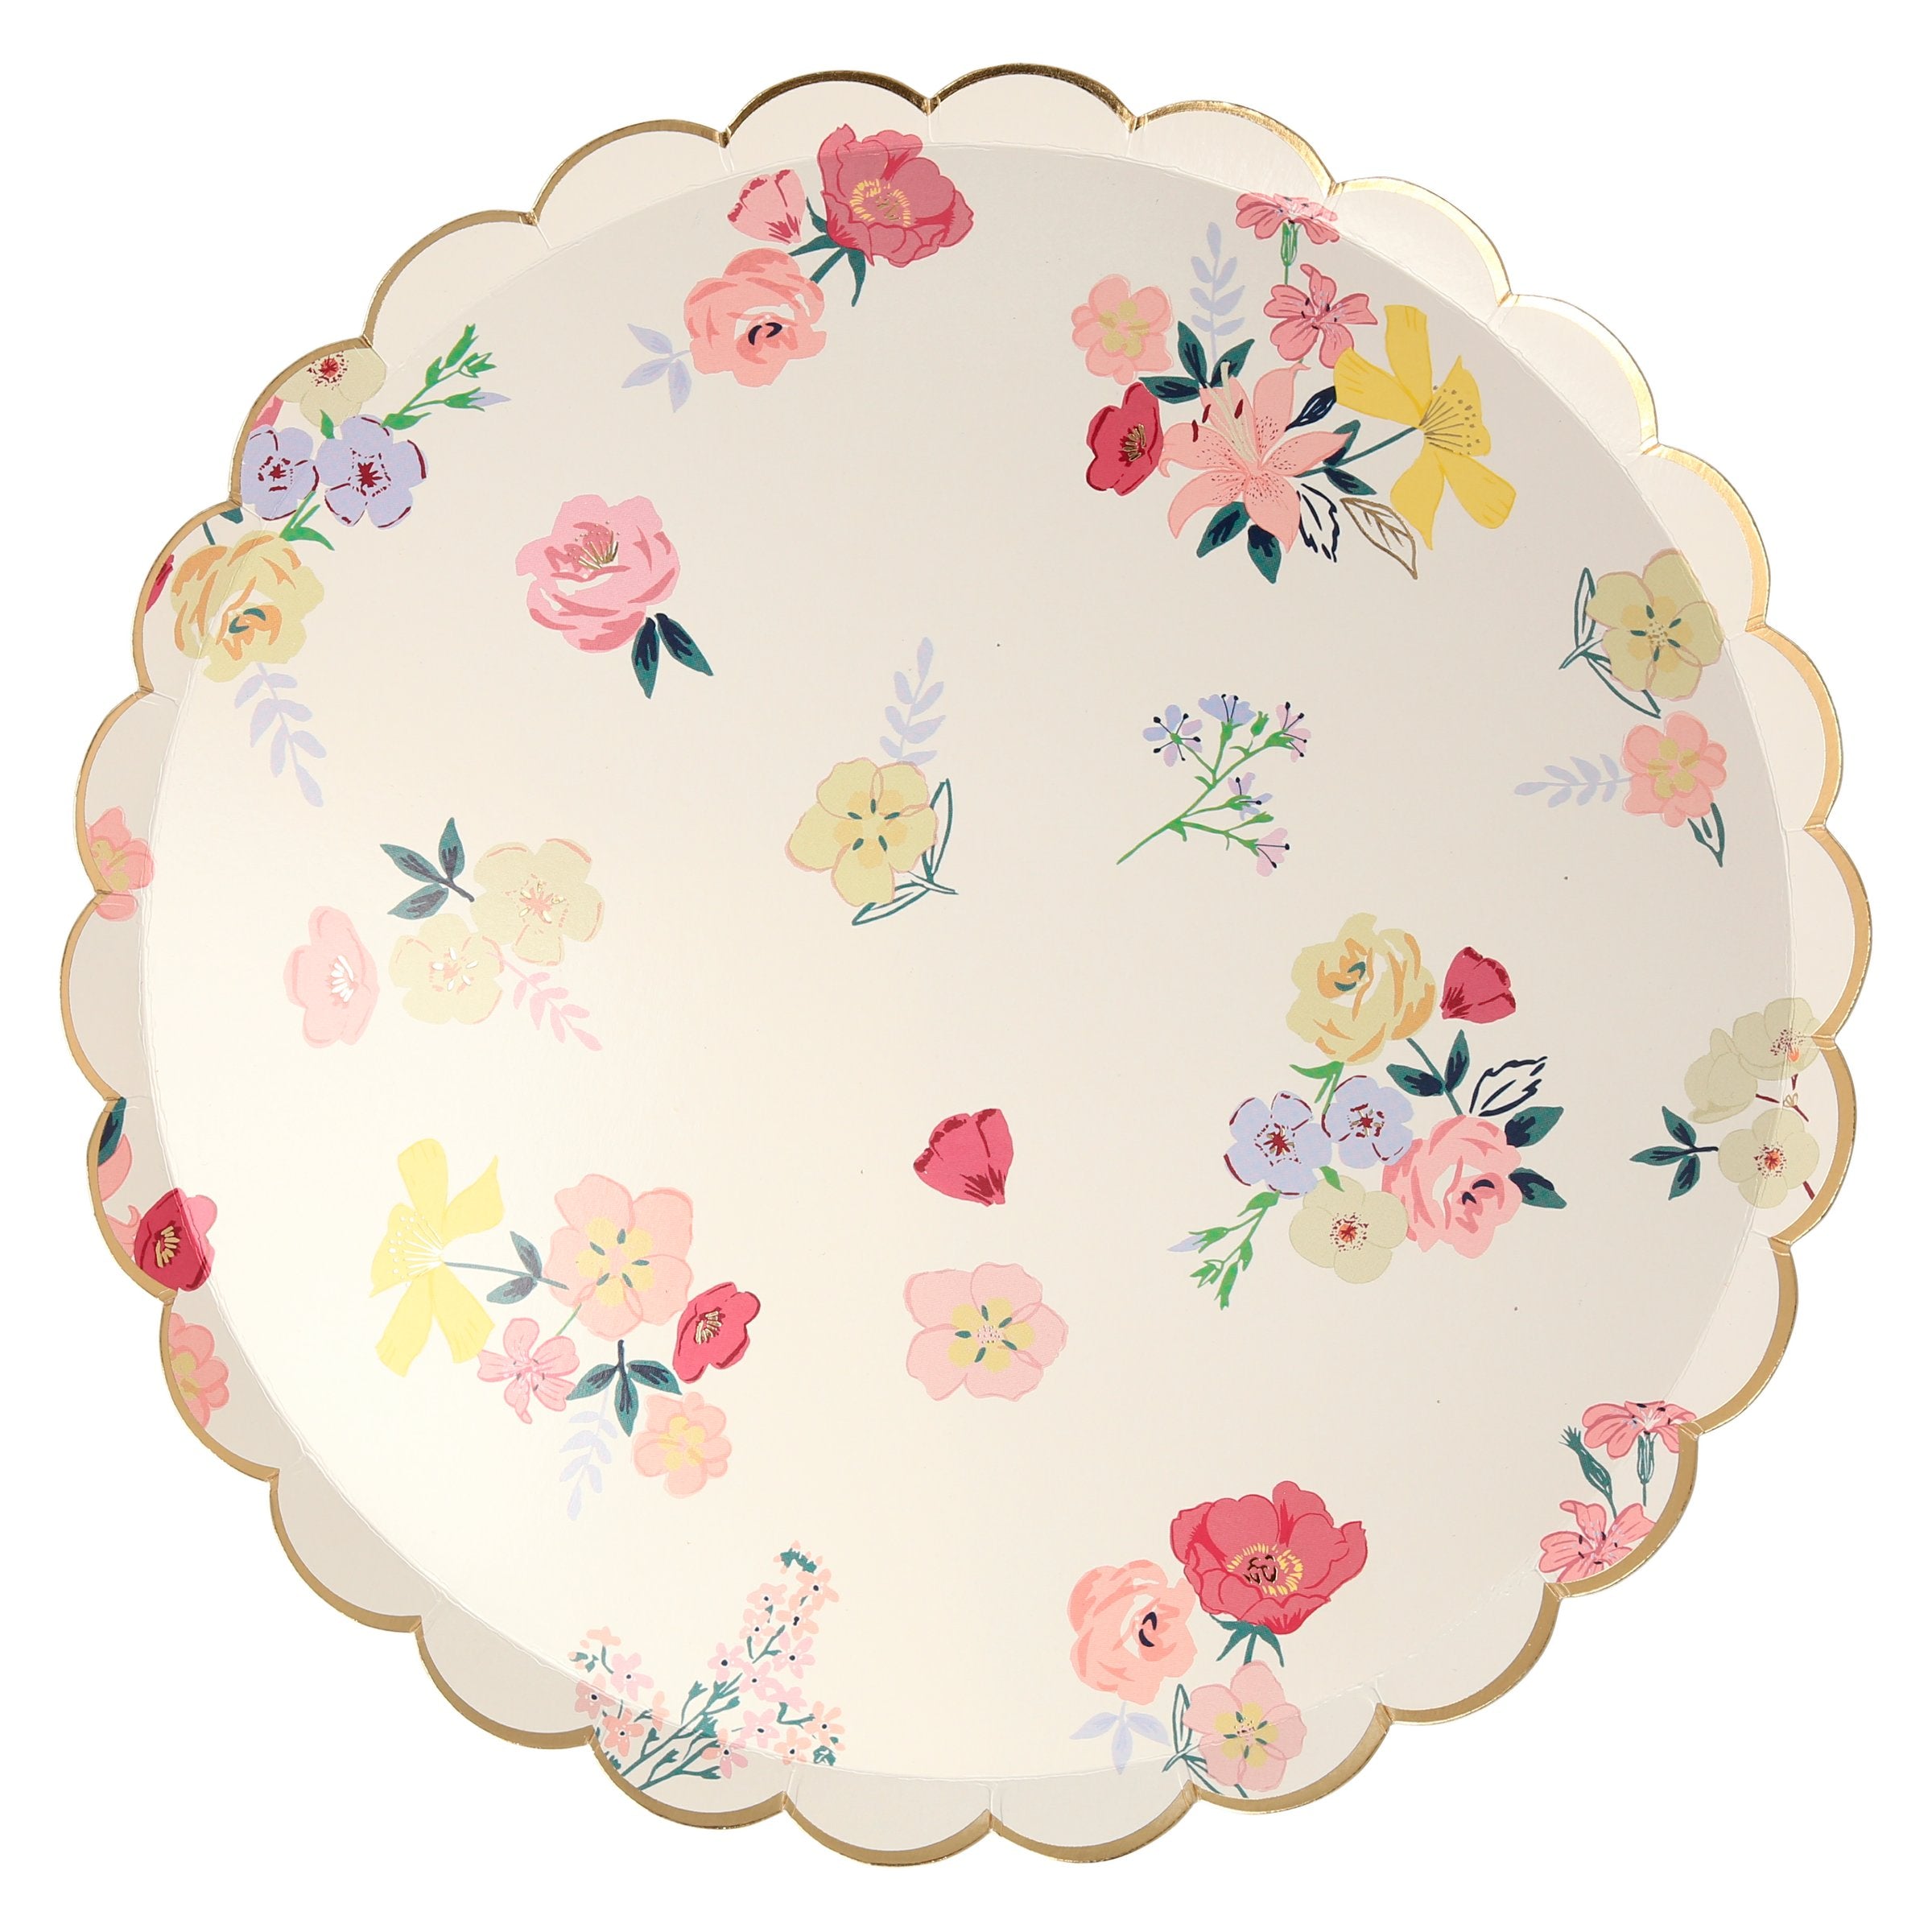 Our party plates, with beautiful flower designs,  look amazing at a picnic, garden party or anywhere you want the beauty of nature.